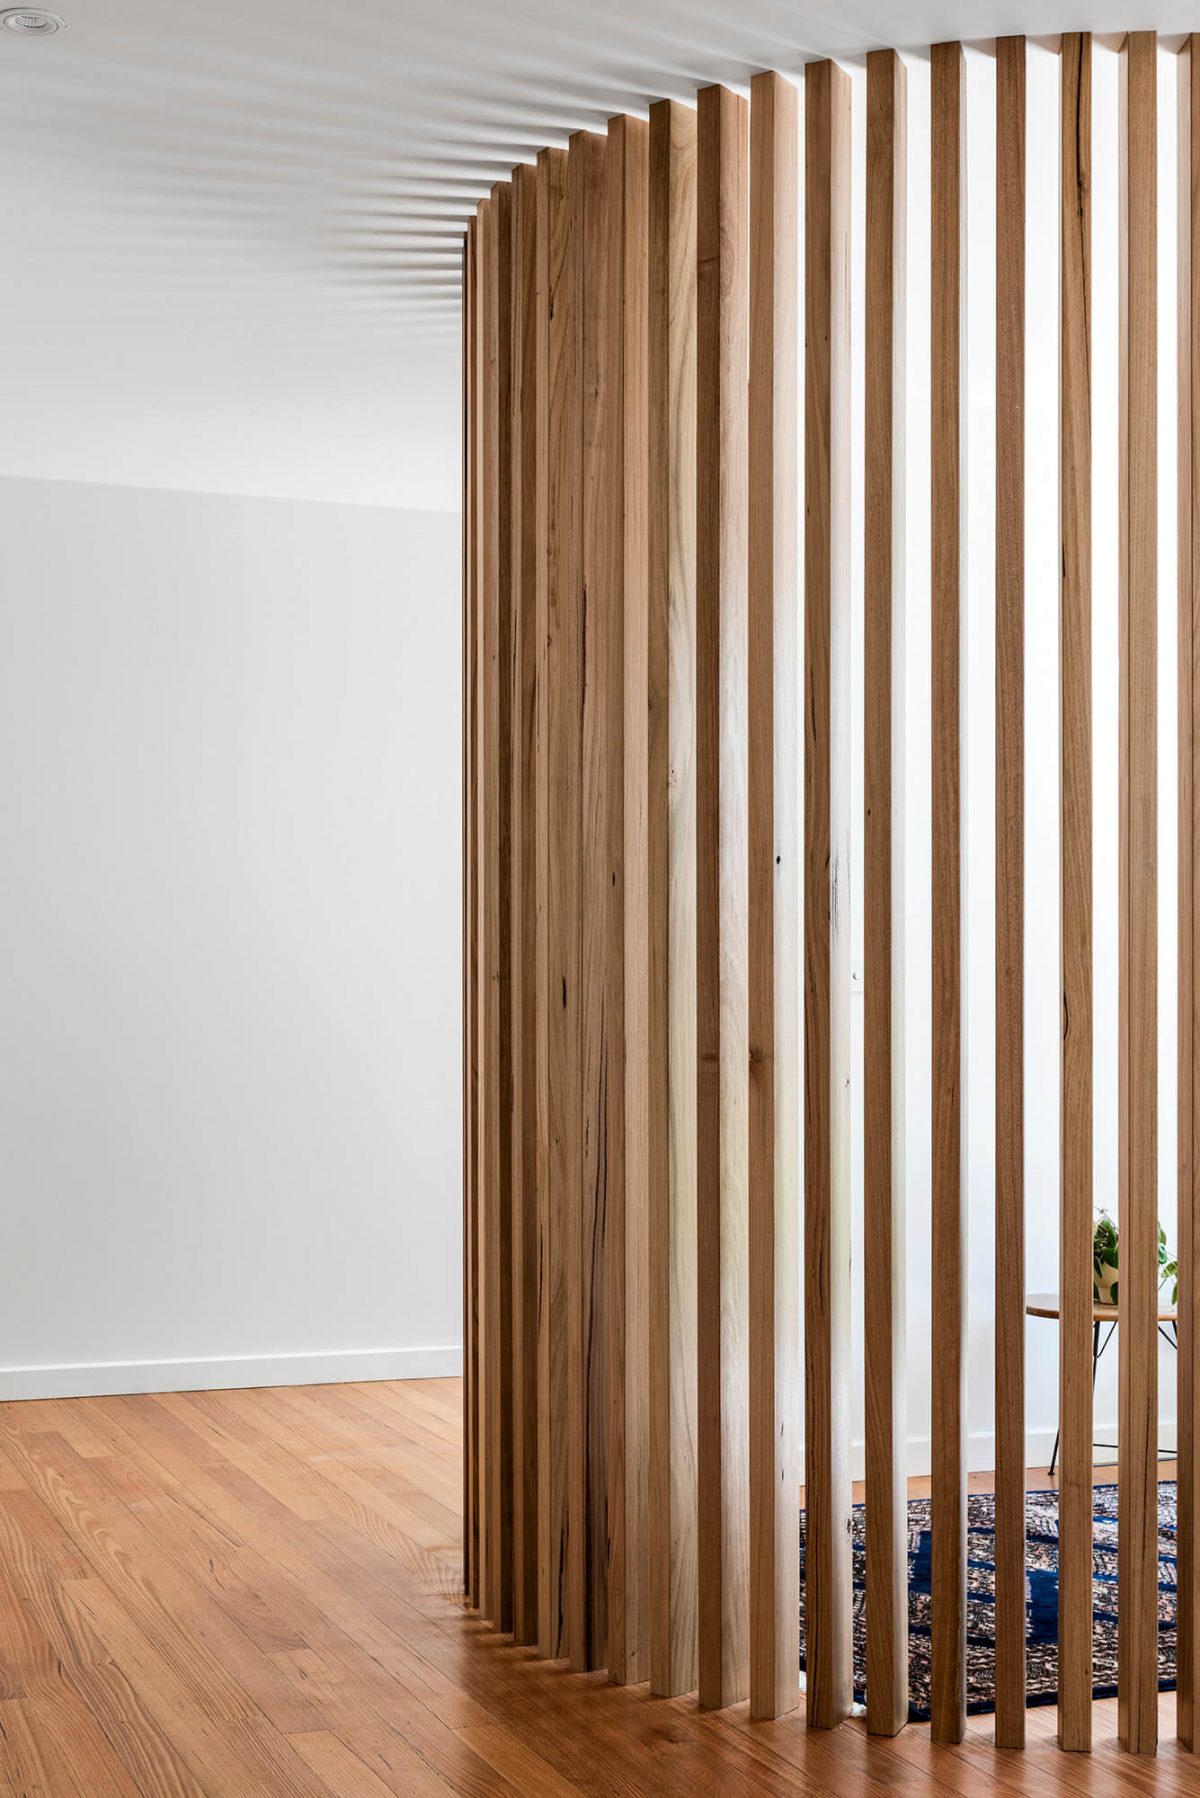 Curved timber batten wall study nook